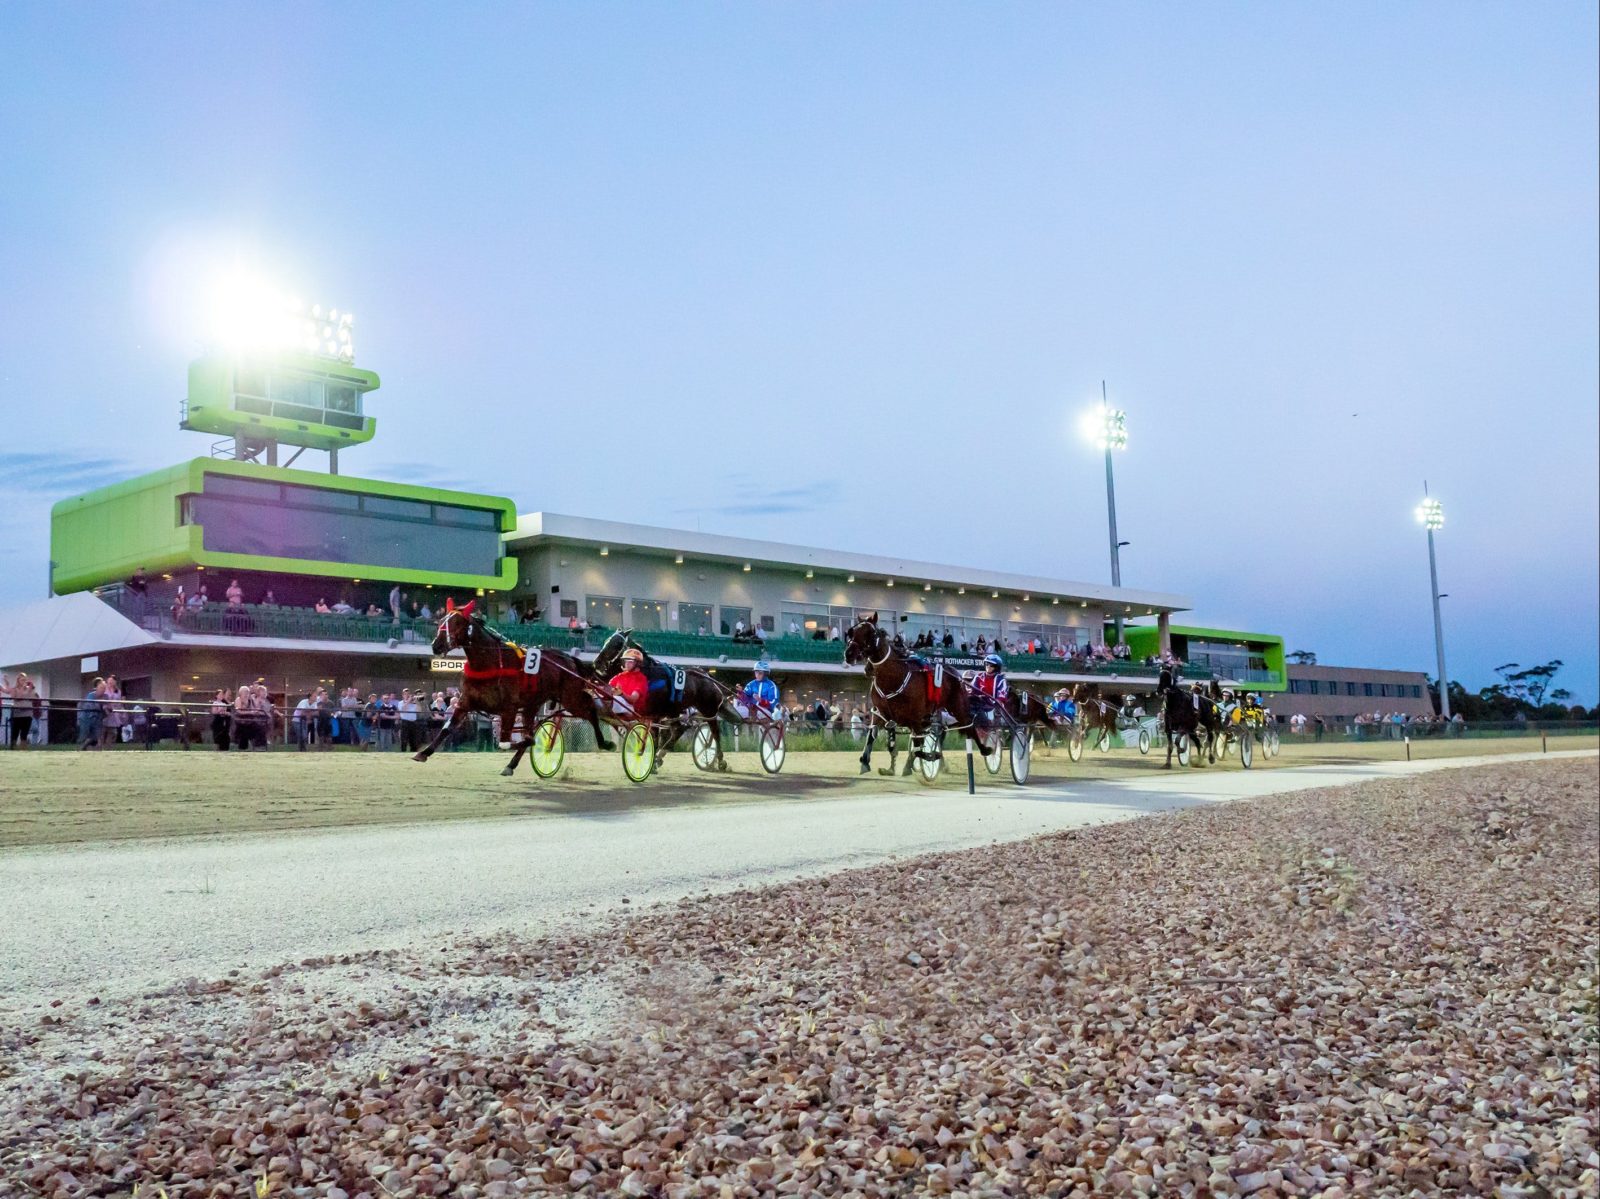 The Harness Racing Track with horses and drivers in a race, capturing the venue in the background.